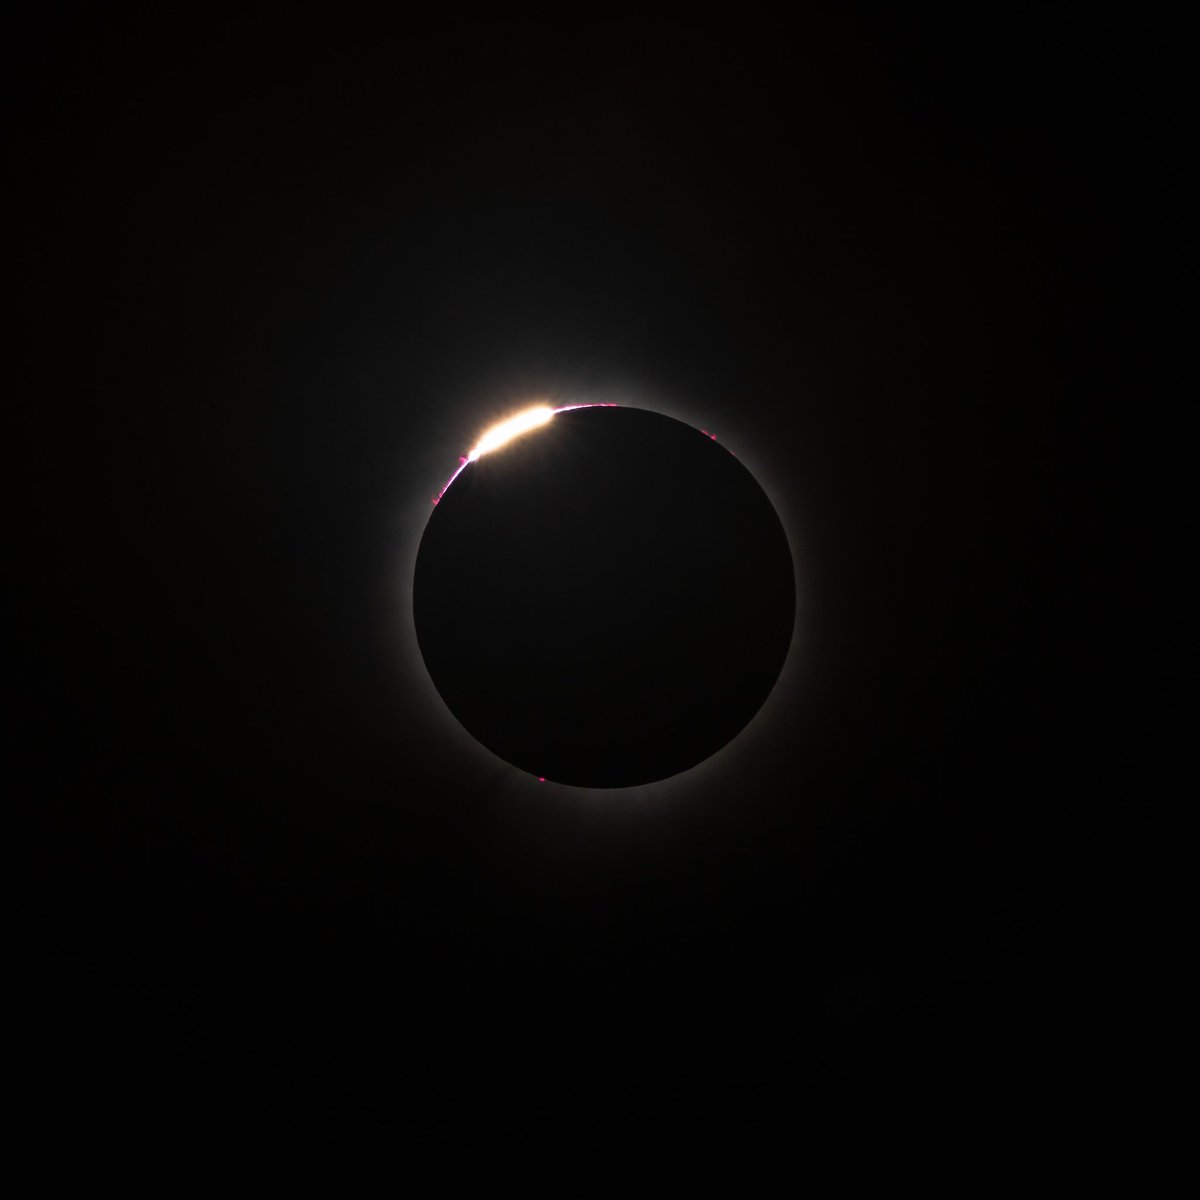 @NationalEclipse I live in Northern Vermont, and it was amazing.